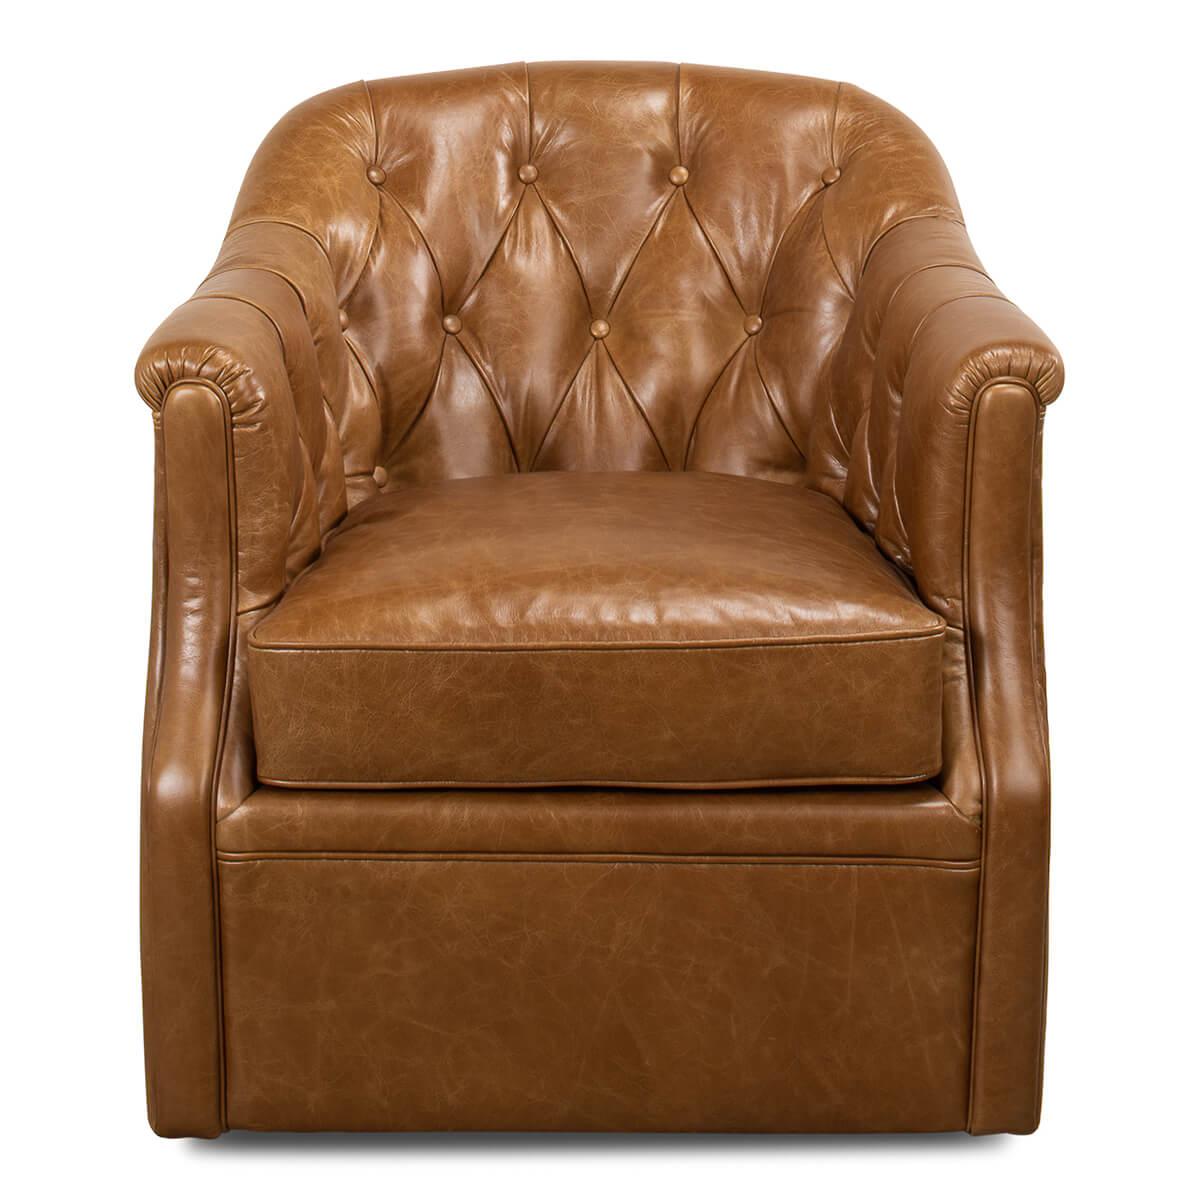 A Classic leather upholstered tub back armchair. In our Cuba brown leather with button tufted backrest and a cushioned seat, raised on a swivel base.

Dimensions: 30